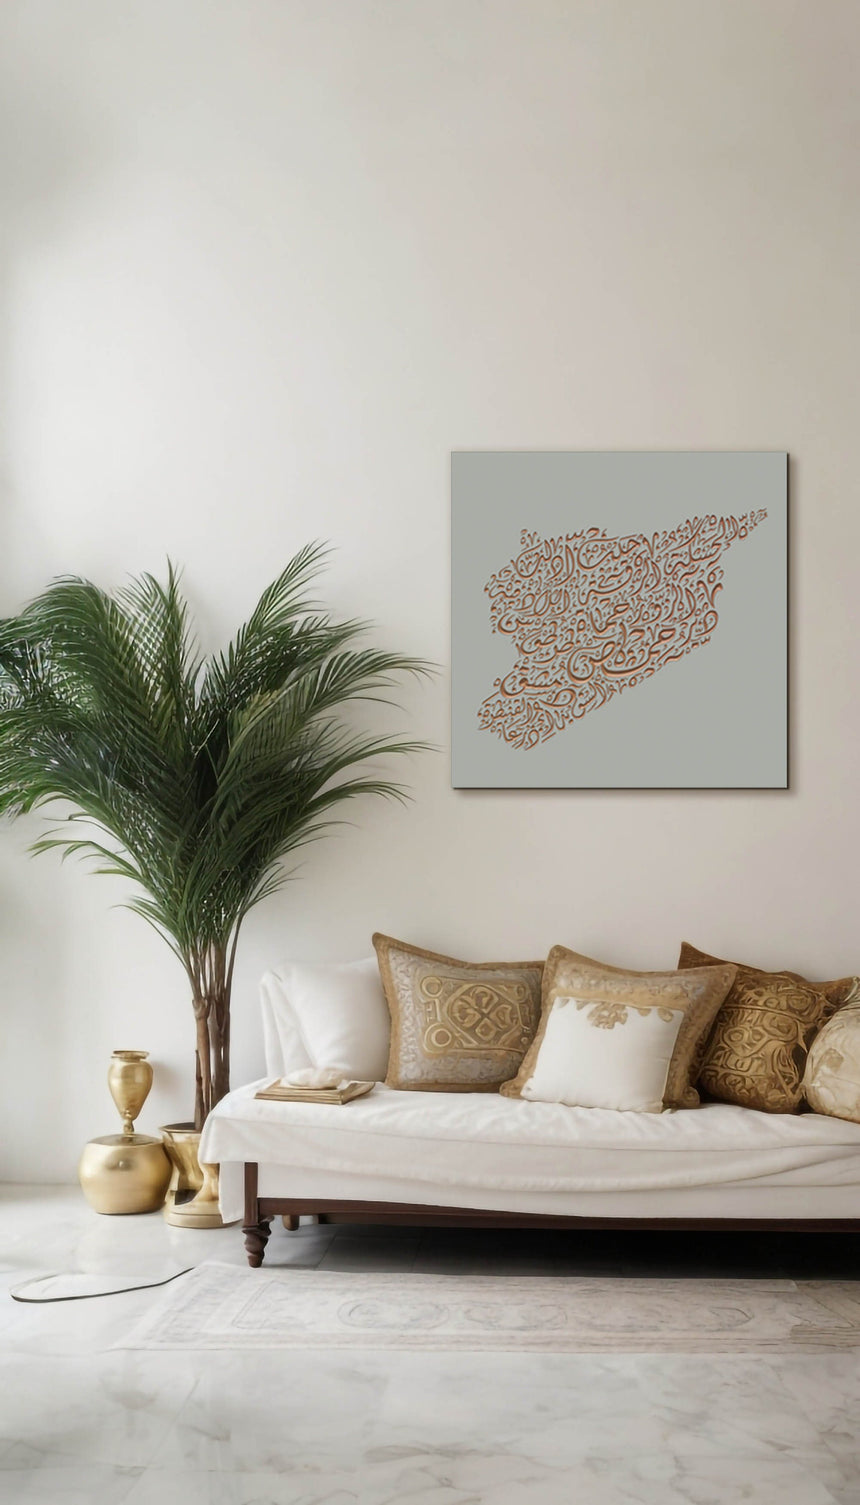 Syria Map: Gray background, copper carving